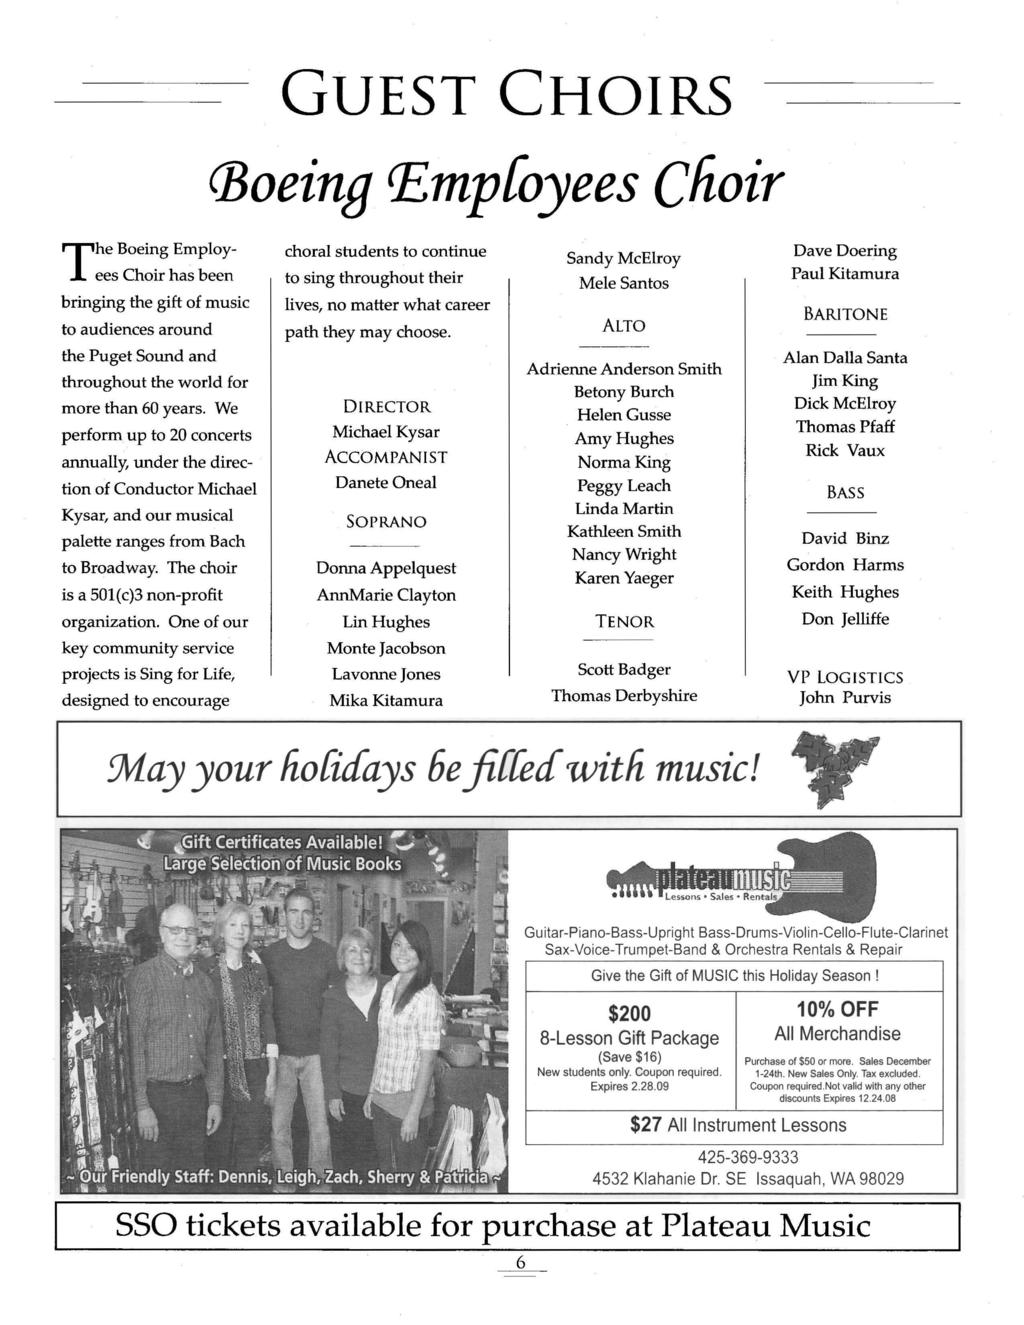 The Boeing Employees Choir has been bringing the gift of music to audiences around the Puget Sound and throughout the world for more than 60 years.